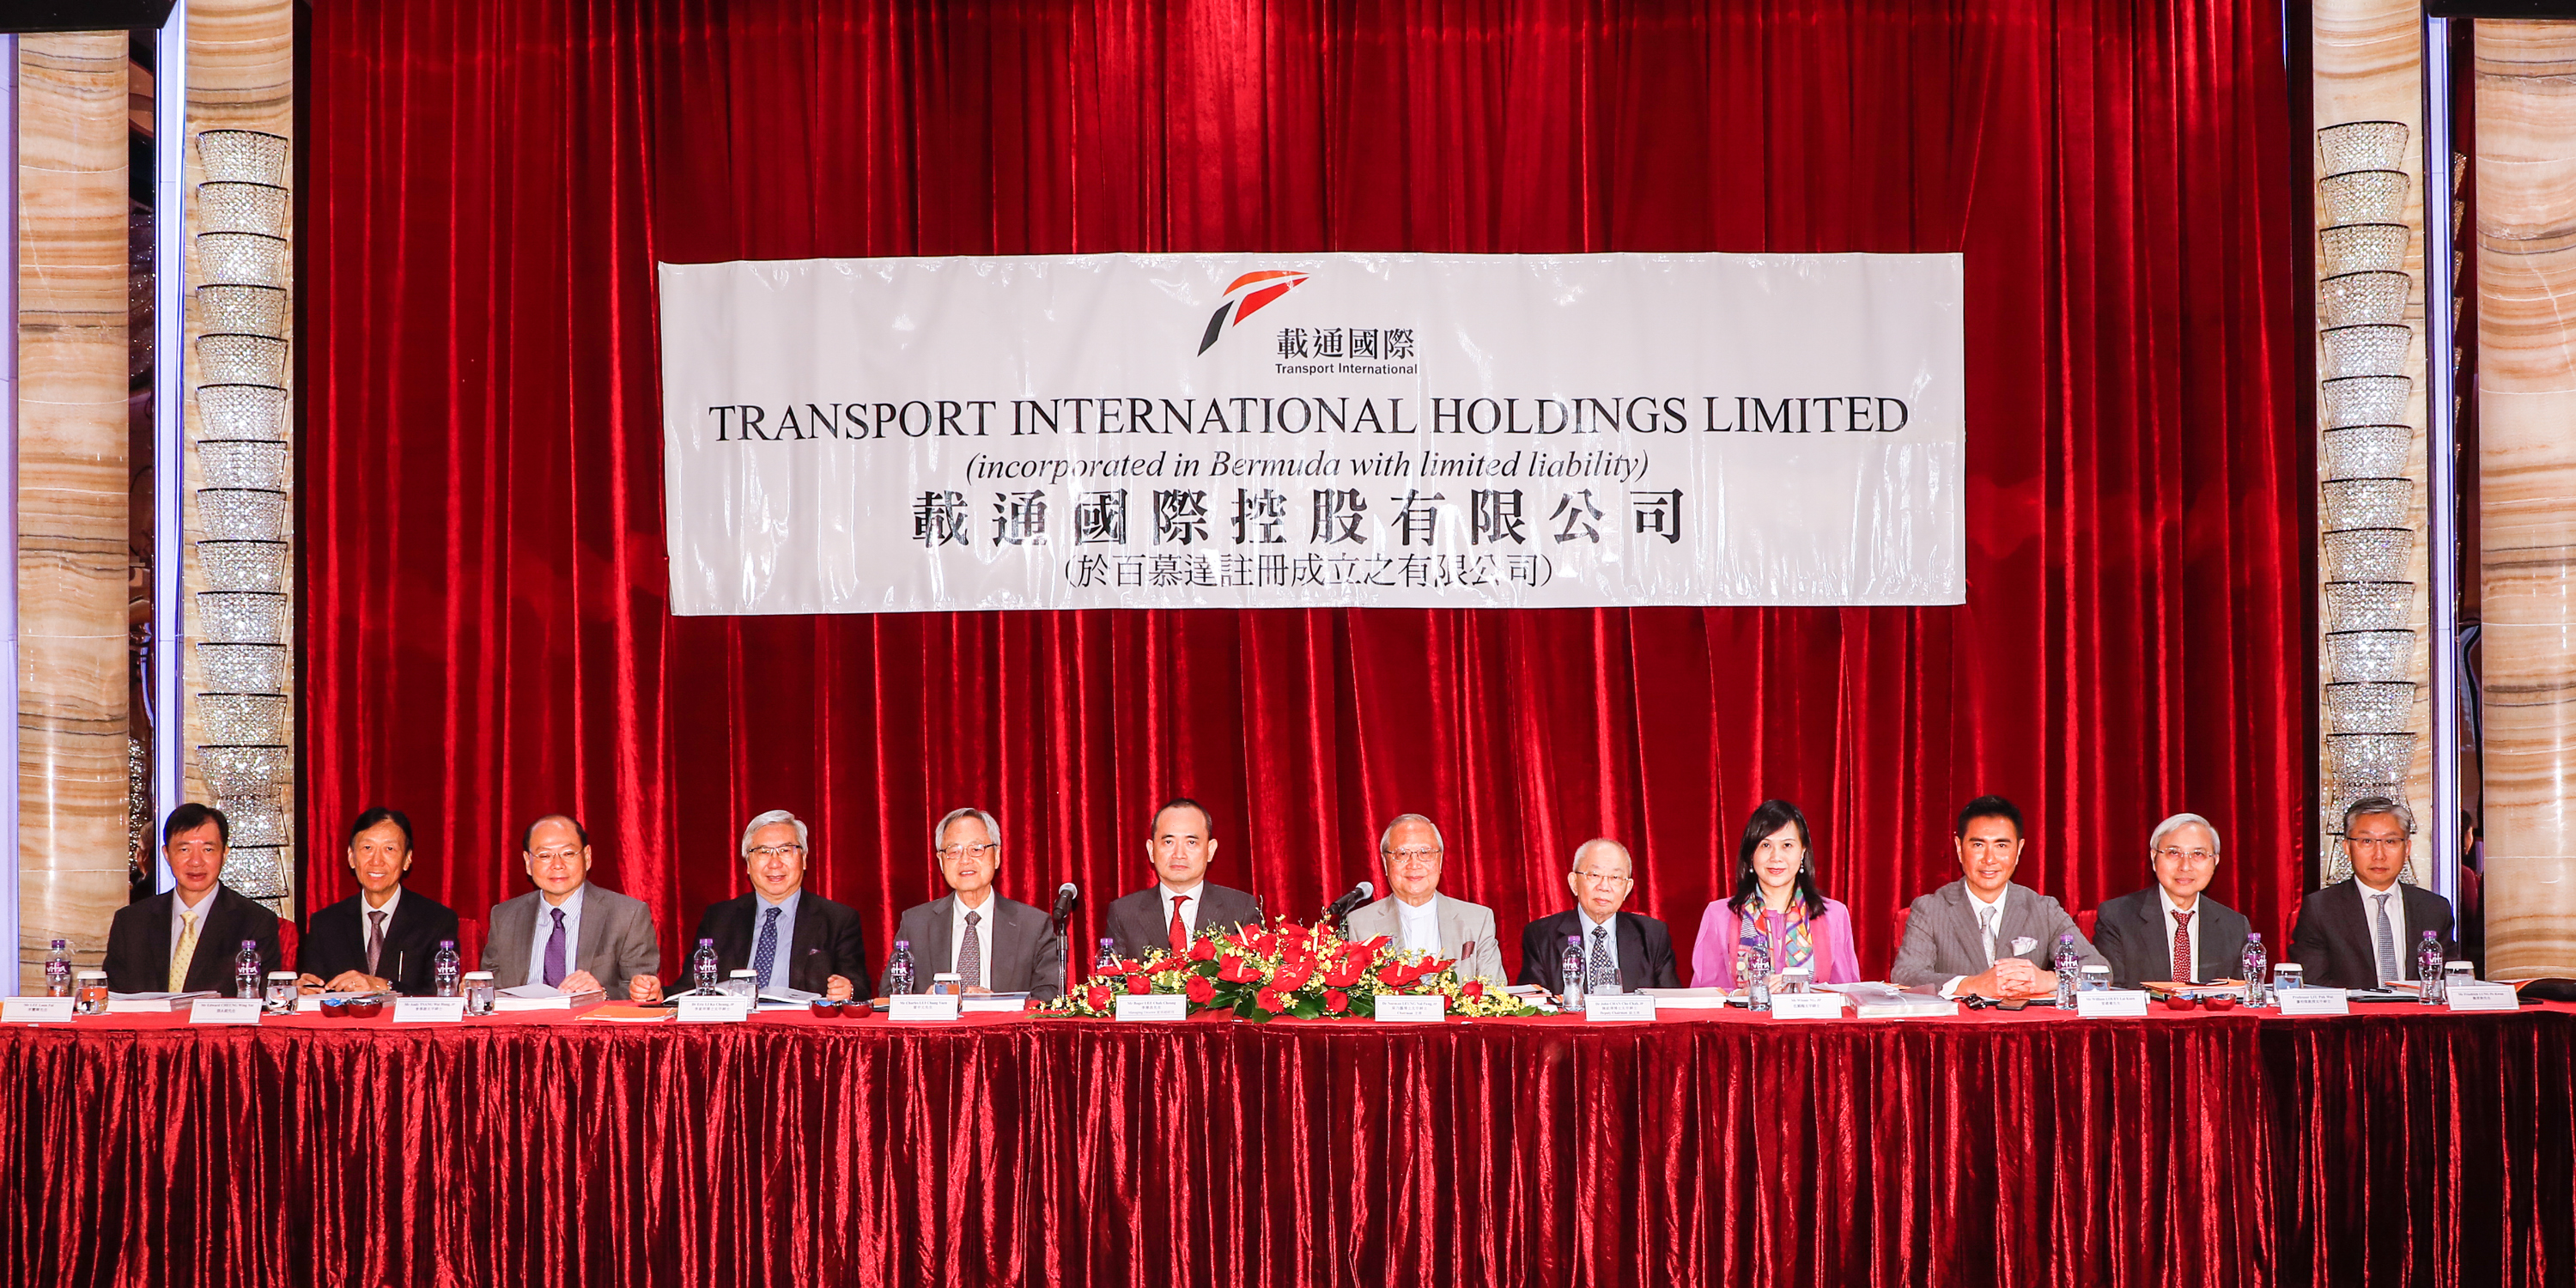 
Transport International Holdings Limited 2019 Annual General Meeting